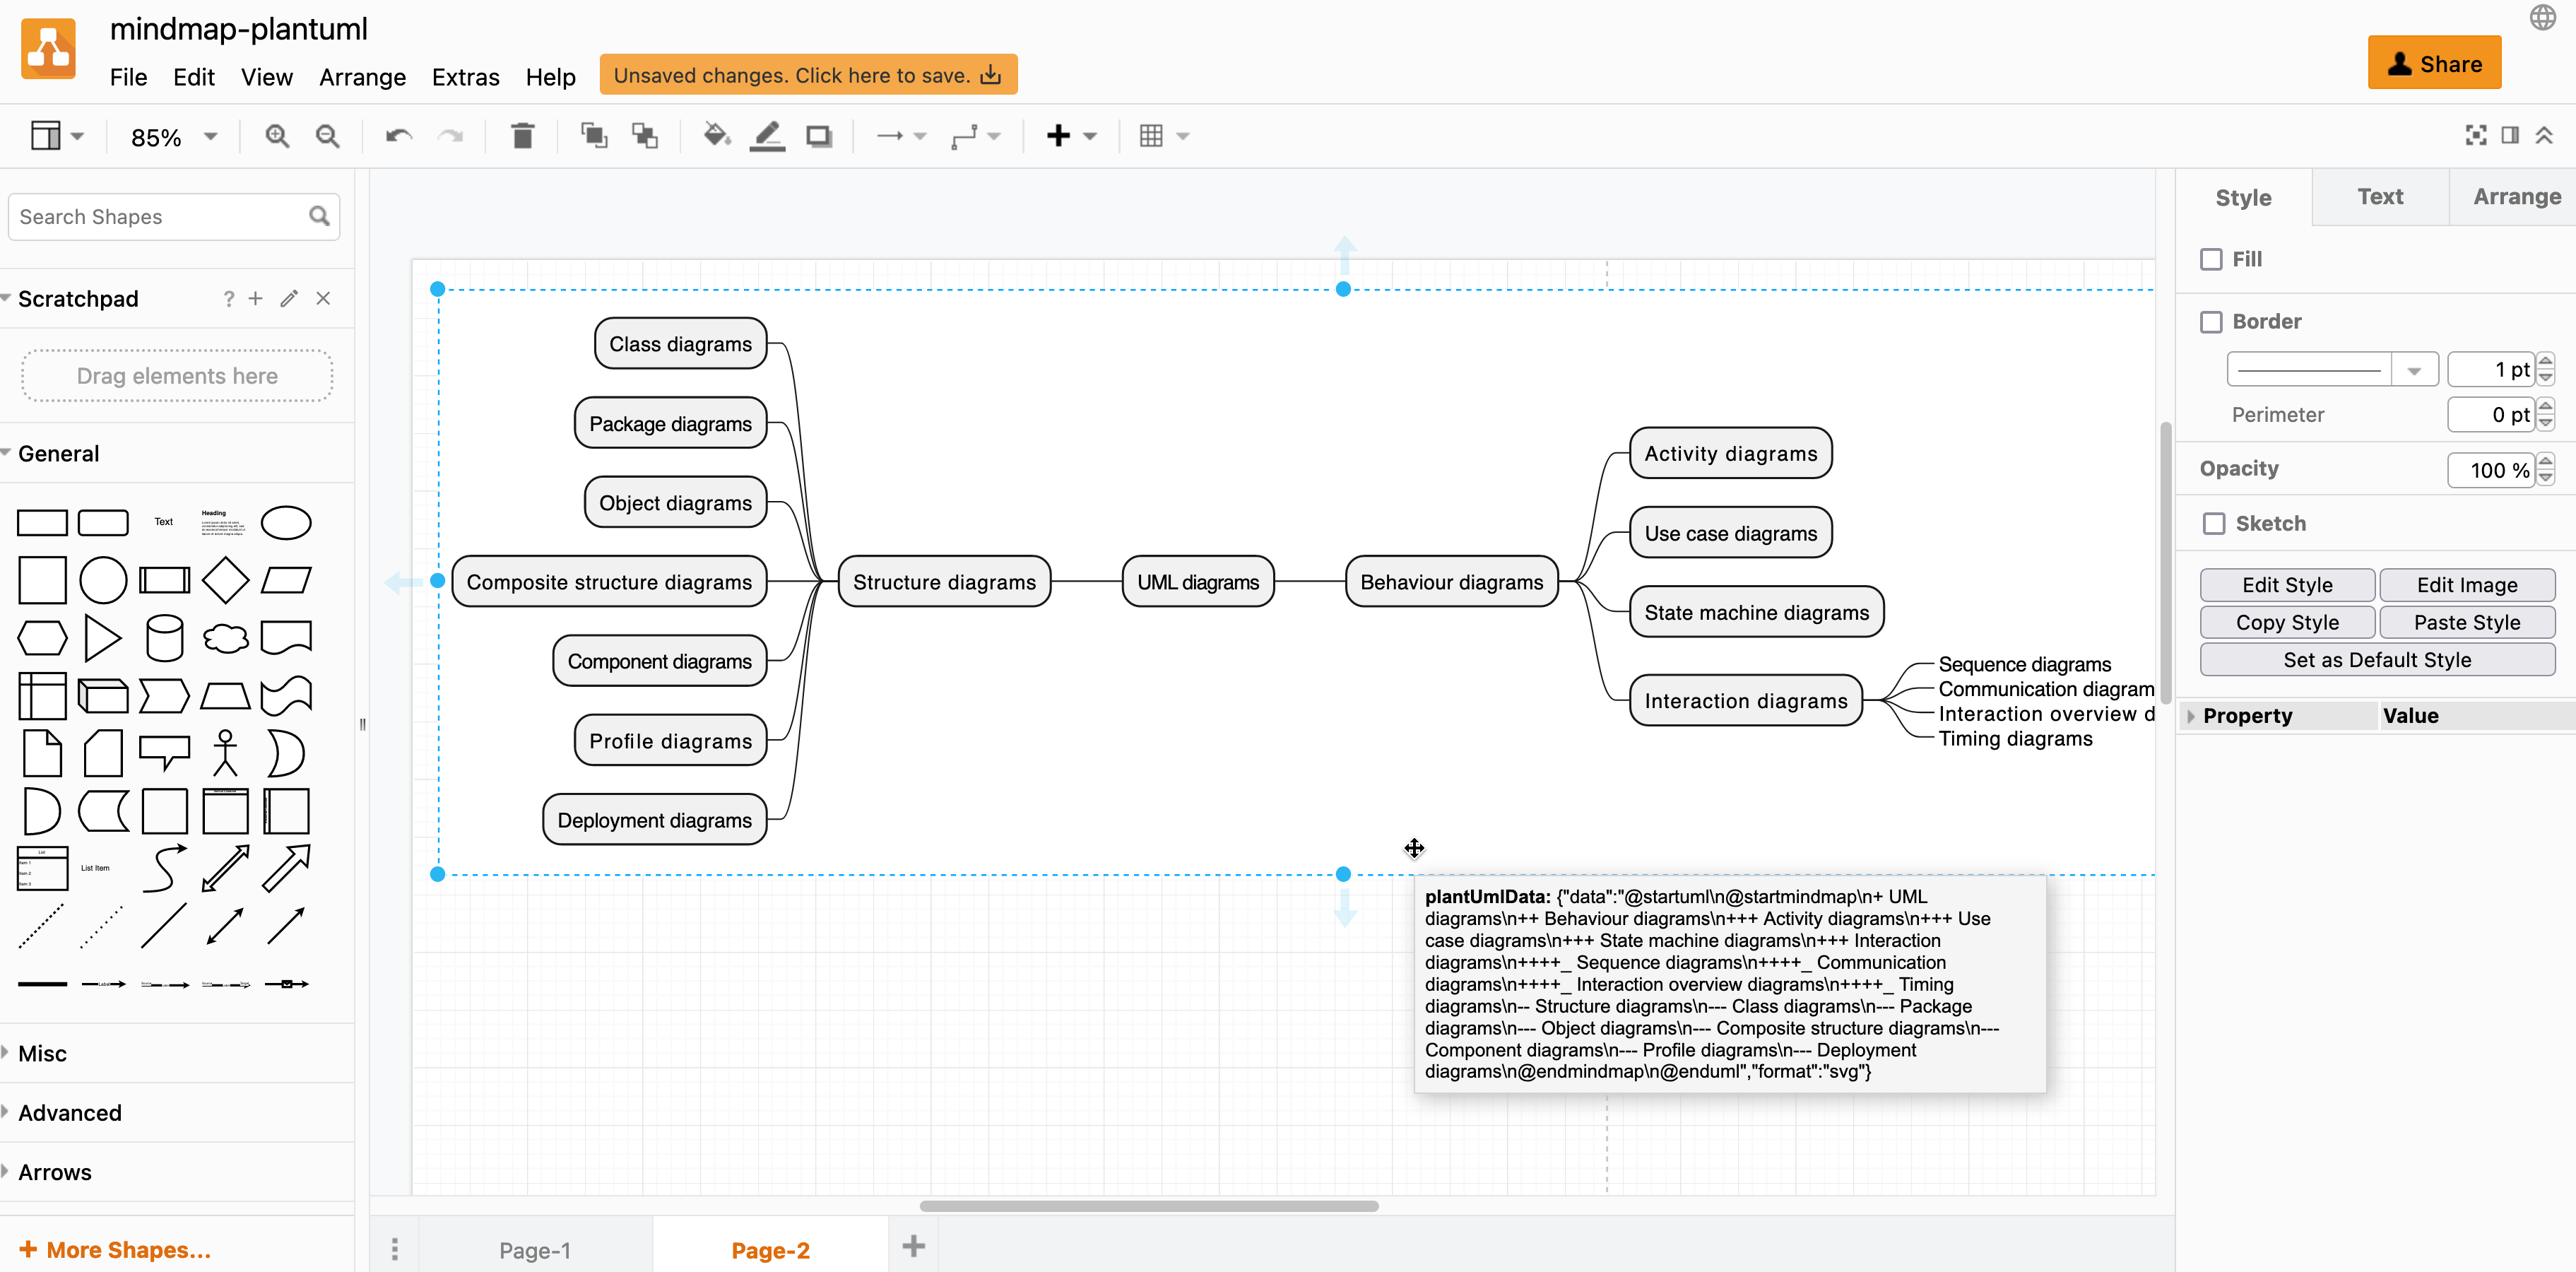 Generate a mindmap from text in draw.io by inserting PlantUML in arithmetic notation via Arrange > Insert > Advanced > PlantUML